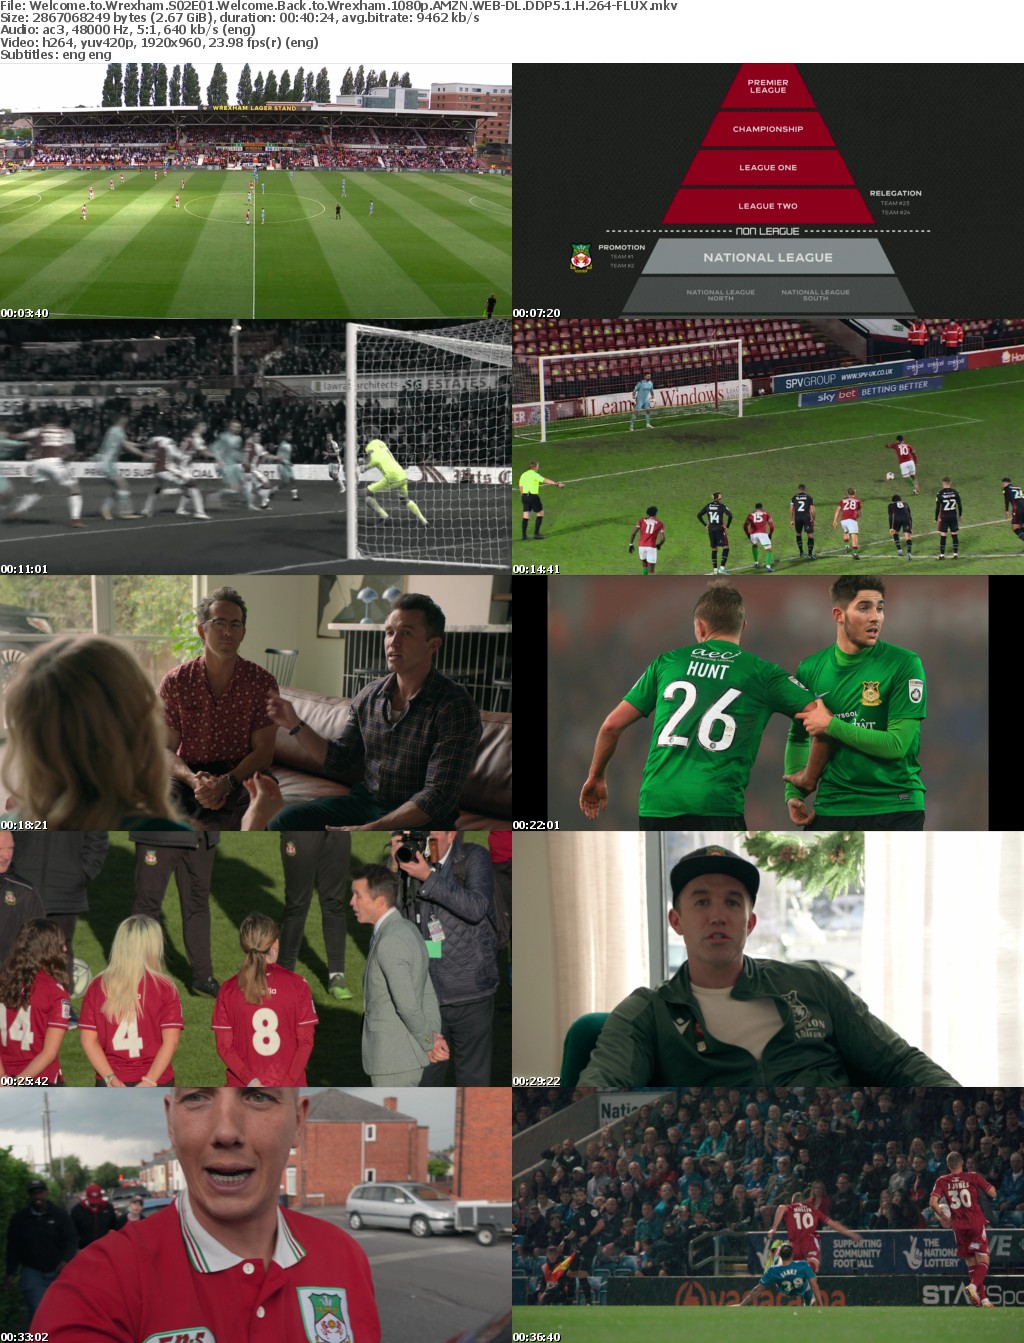 Welcome to Wrexham S02E01 Welcome Back to Wrexham 1080p AMZN WEB-DL DDP5 1 H 264-FLUX